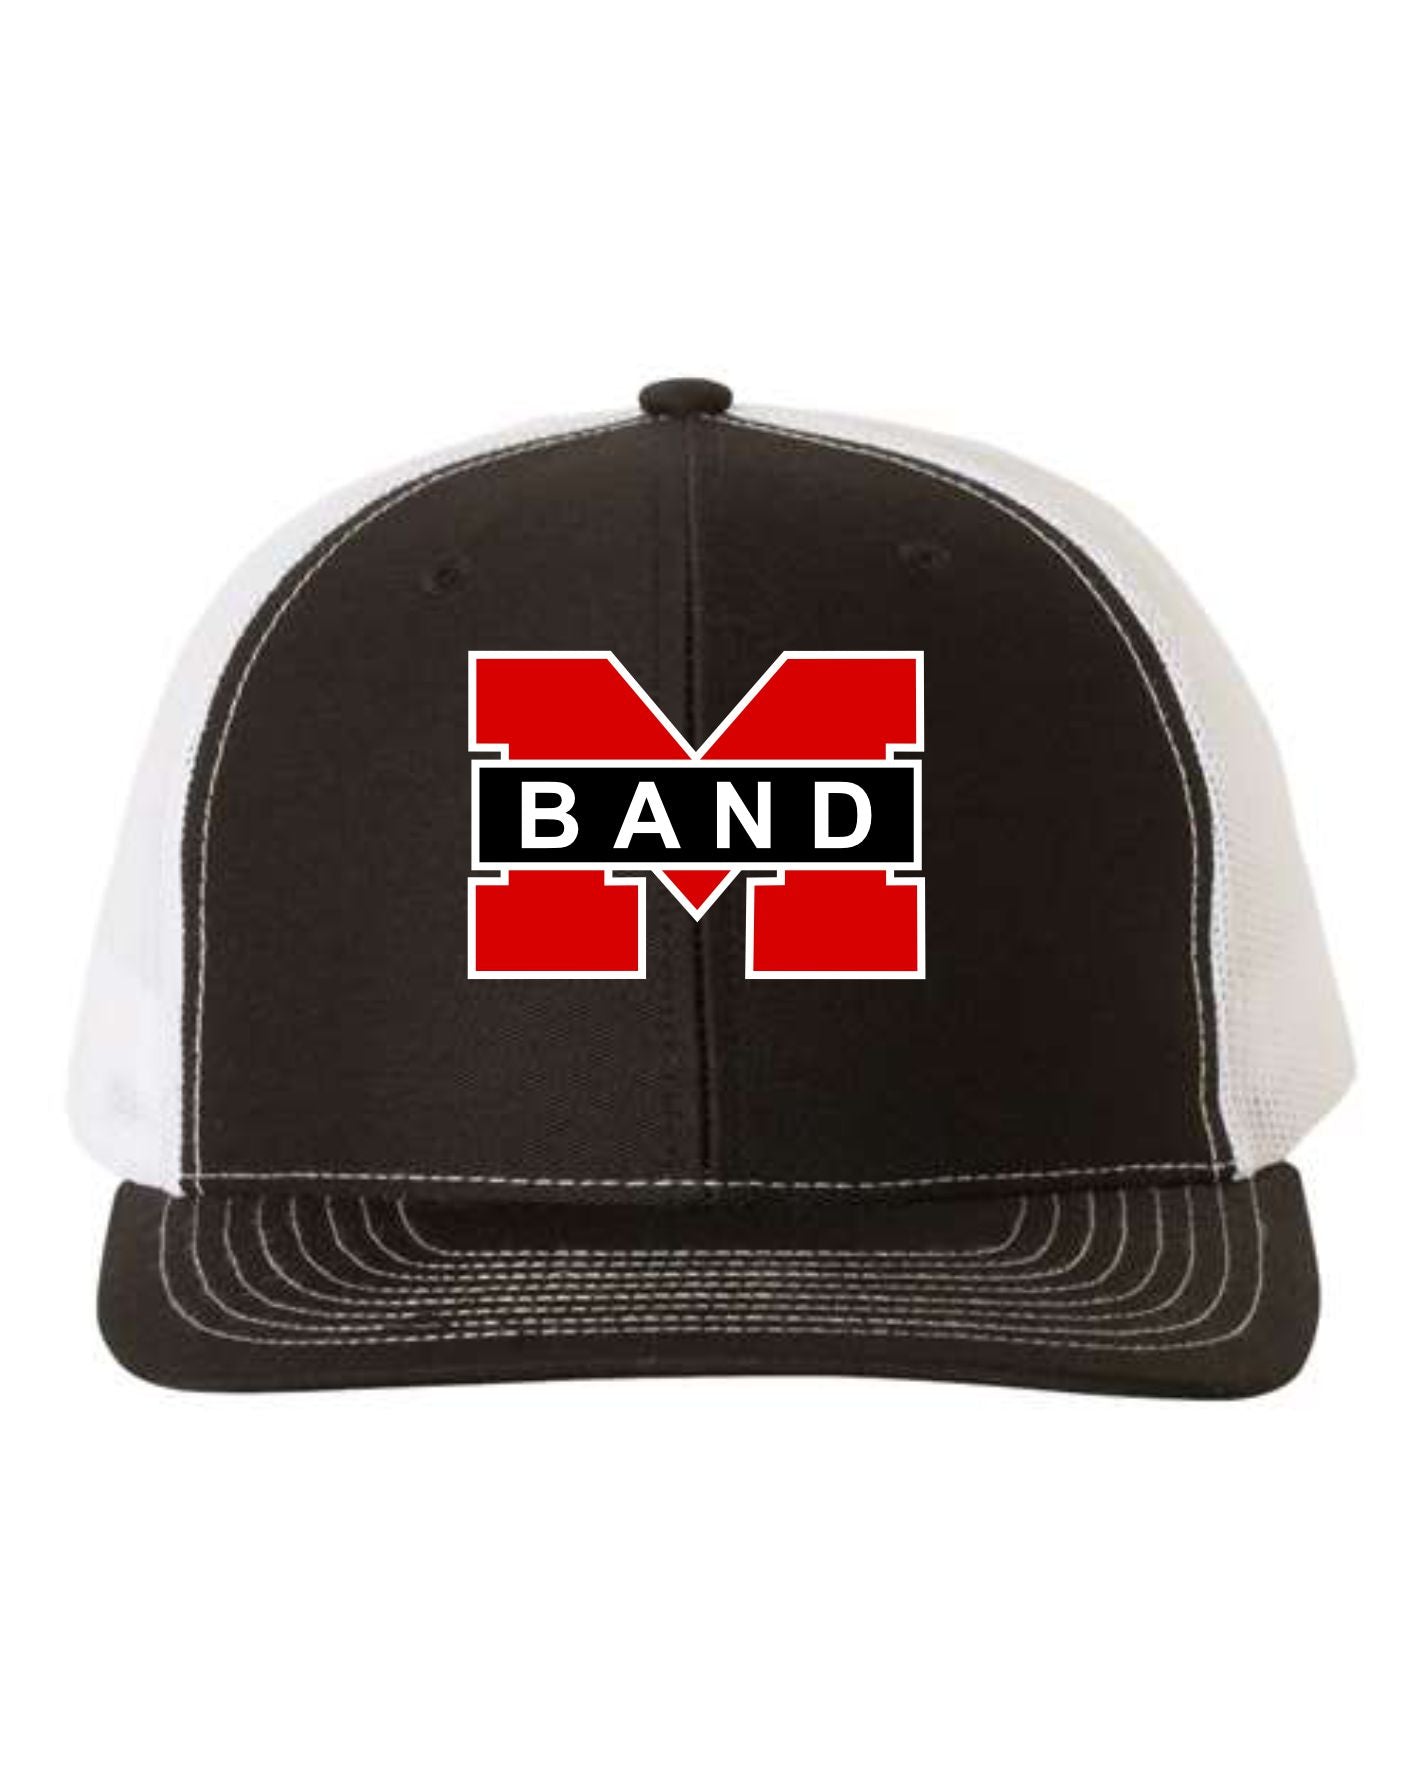 M Band Hat - Black - Embroidered